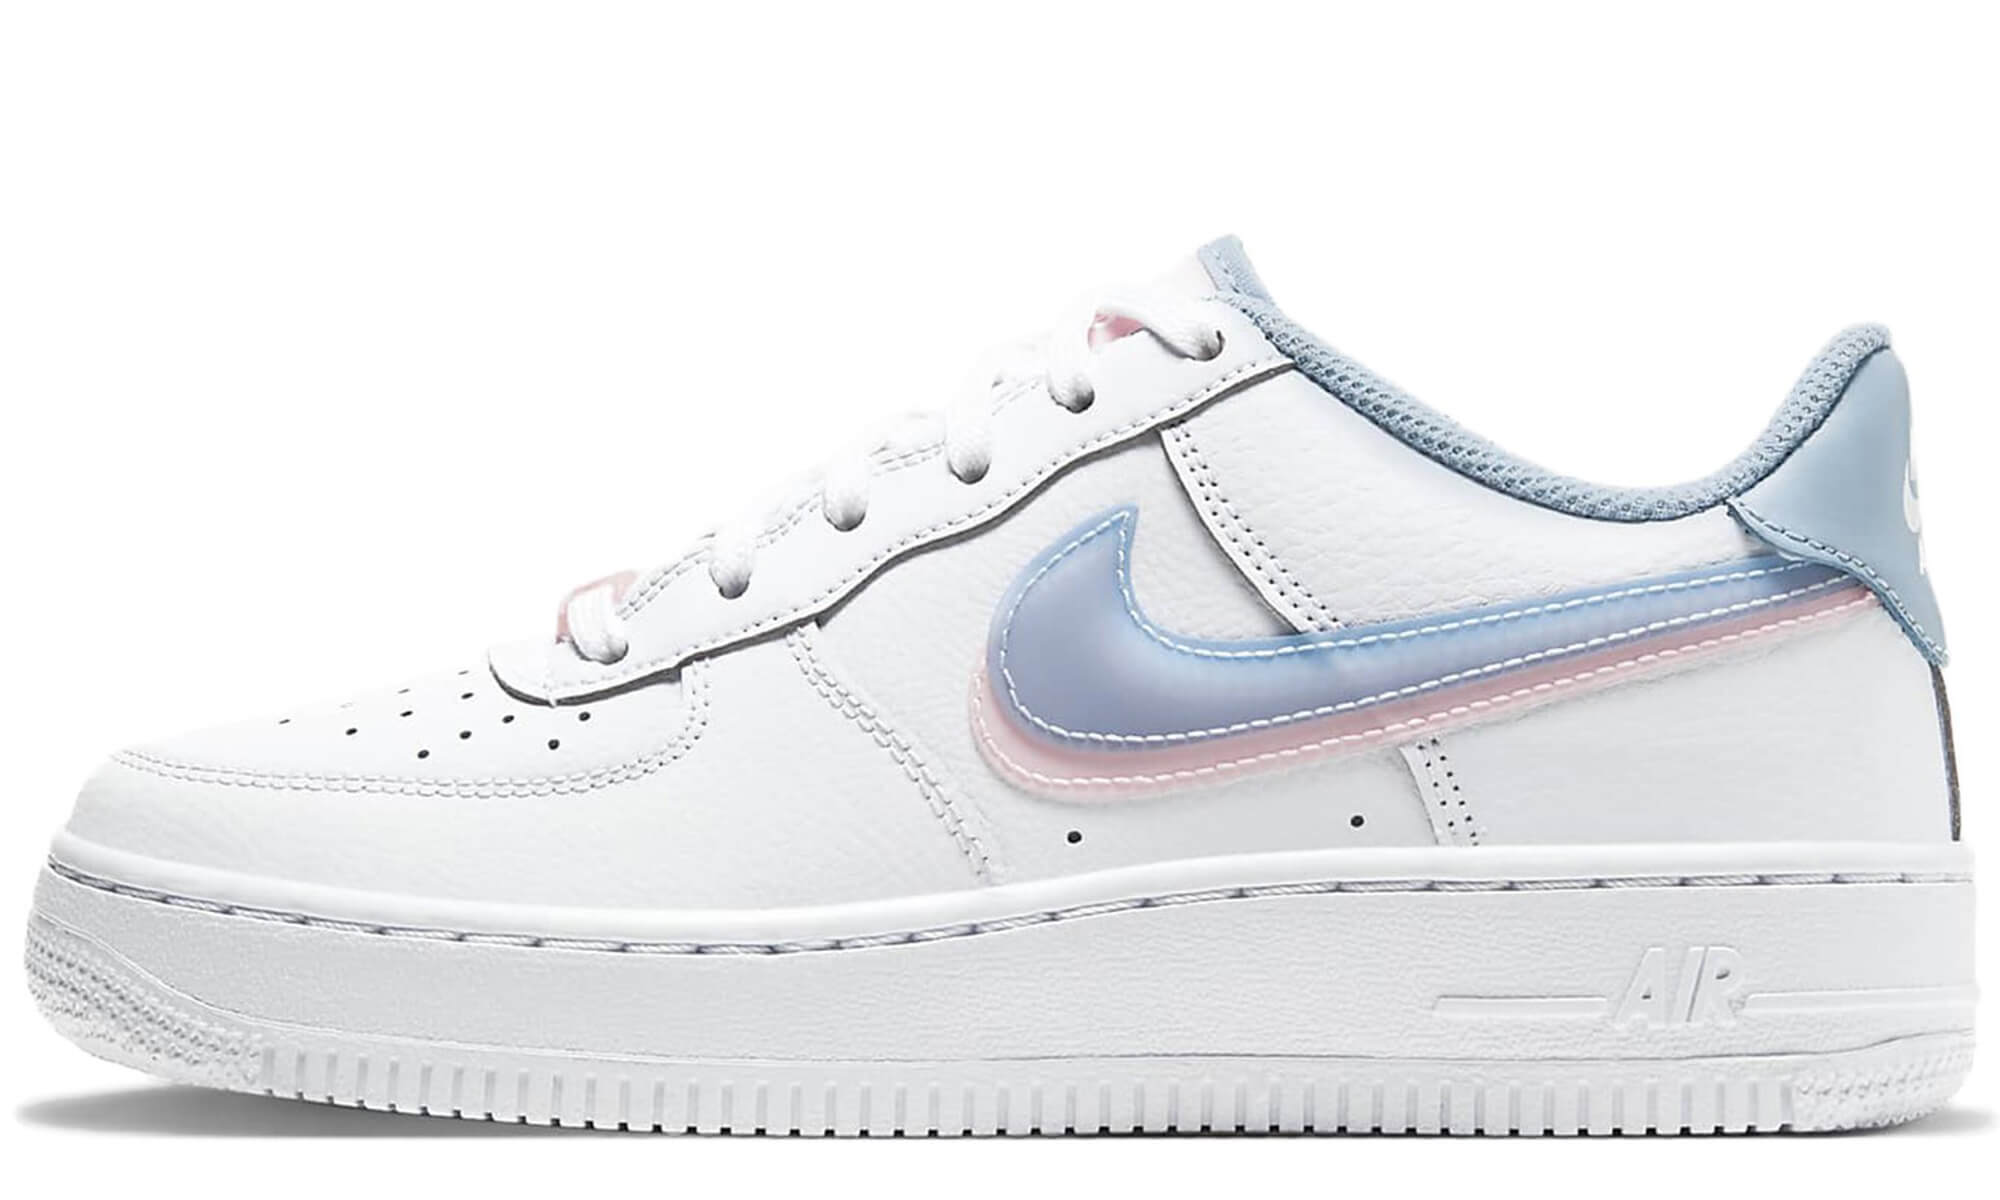 NIKE AIR FORCE 1 '07 LV8 (GS) DOUBLE SWOOSH- WHITE/ICE BLUE-LIGHT